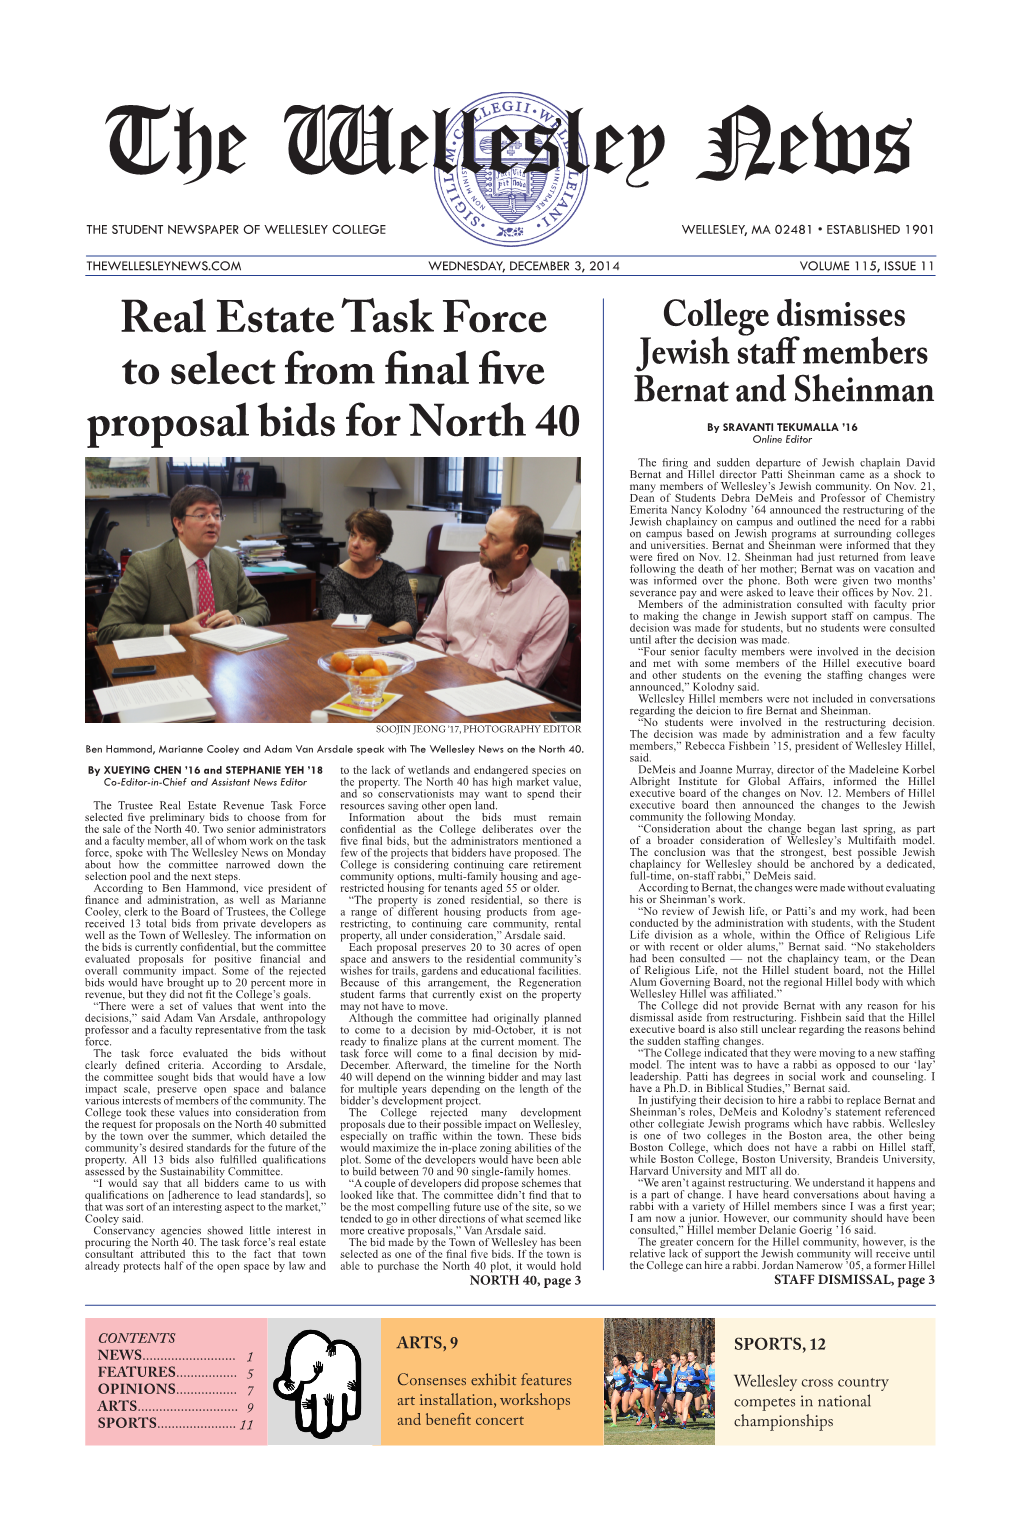 Real Estate Task Force to Select from Final Five Proposal Bids for North 40